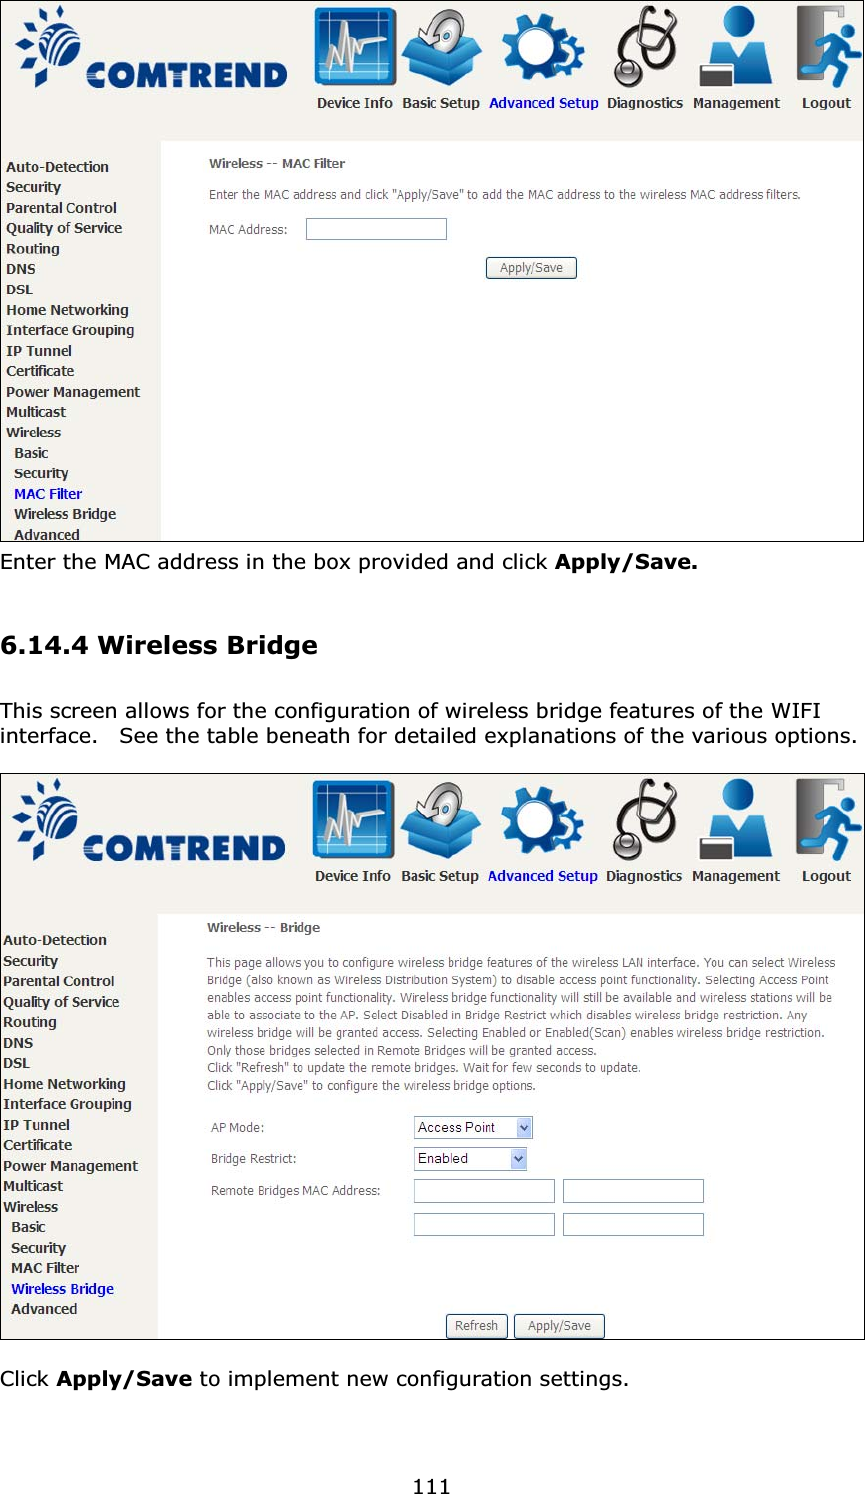 111Enter the MAC address in the box provided and click Apply/Save.6.14.4 Wireless BridgeThis screen allows for the configuration of wireless bridge features of the WIFIinterface.    See the table beneath for detailed explanations of the various options.Click Apply/Save to implement new configuration settings.